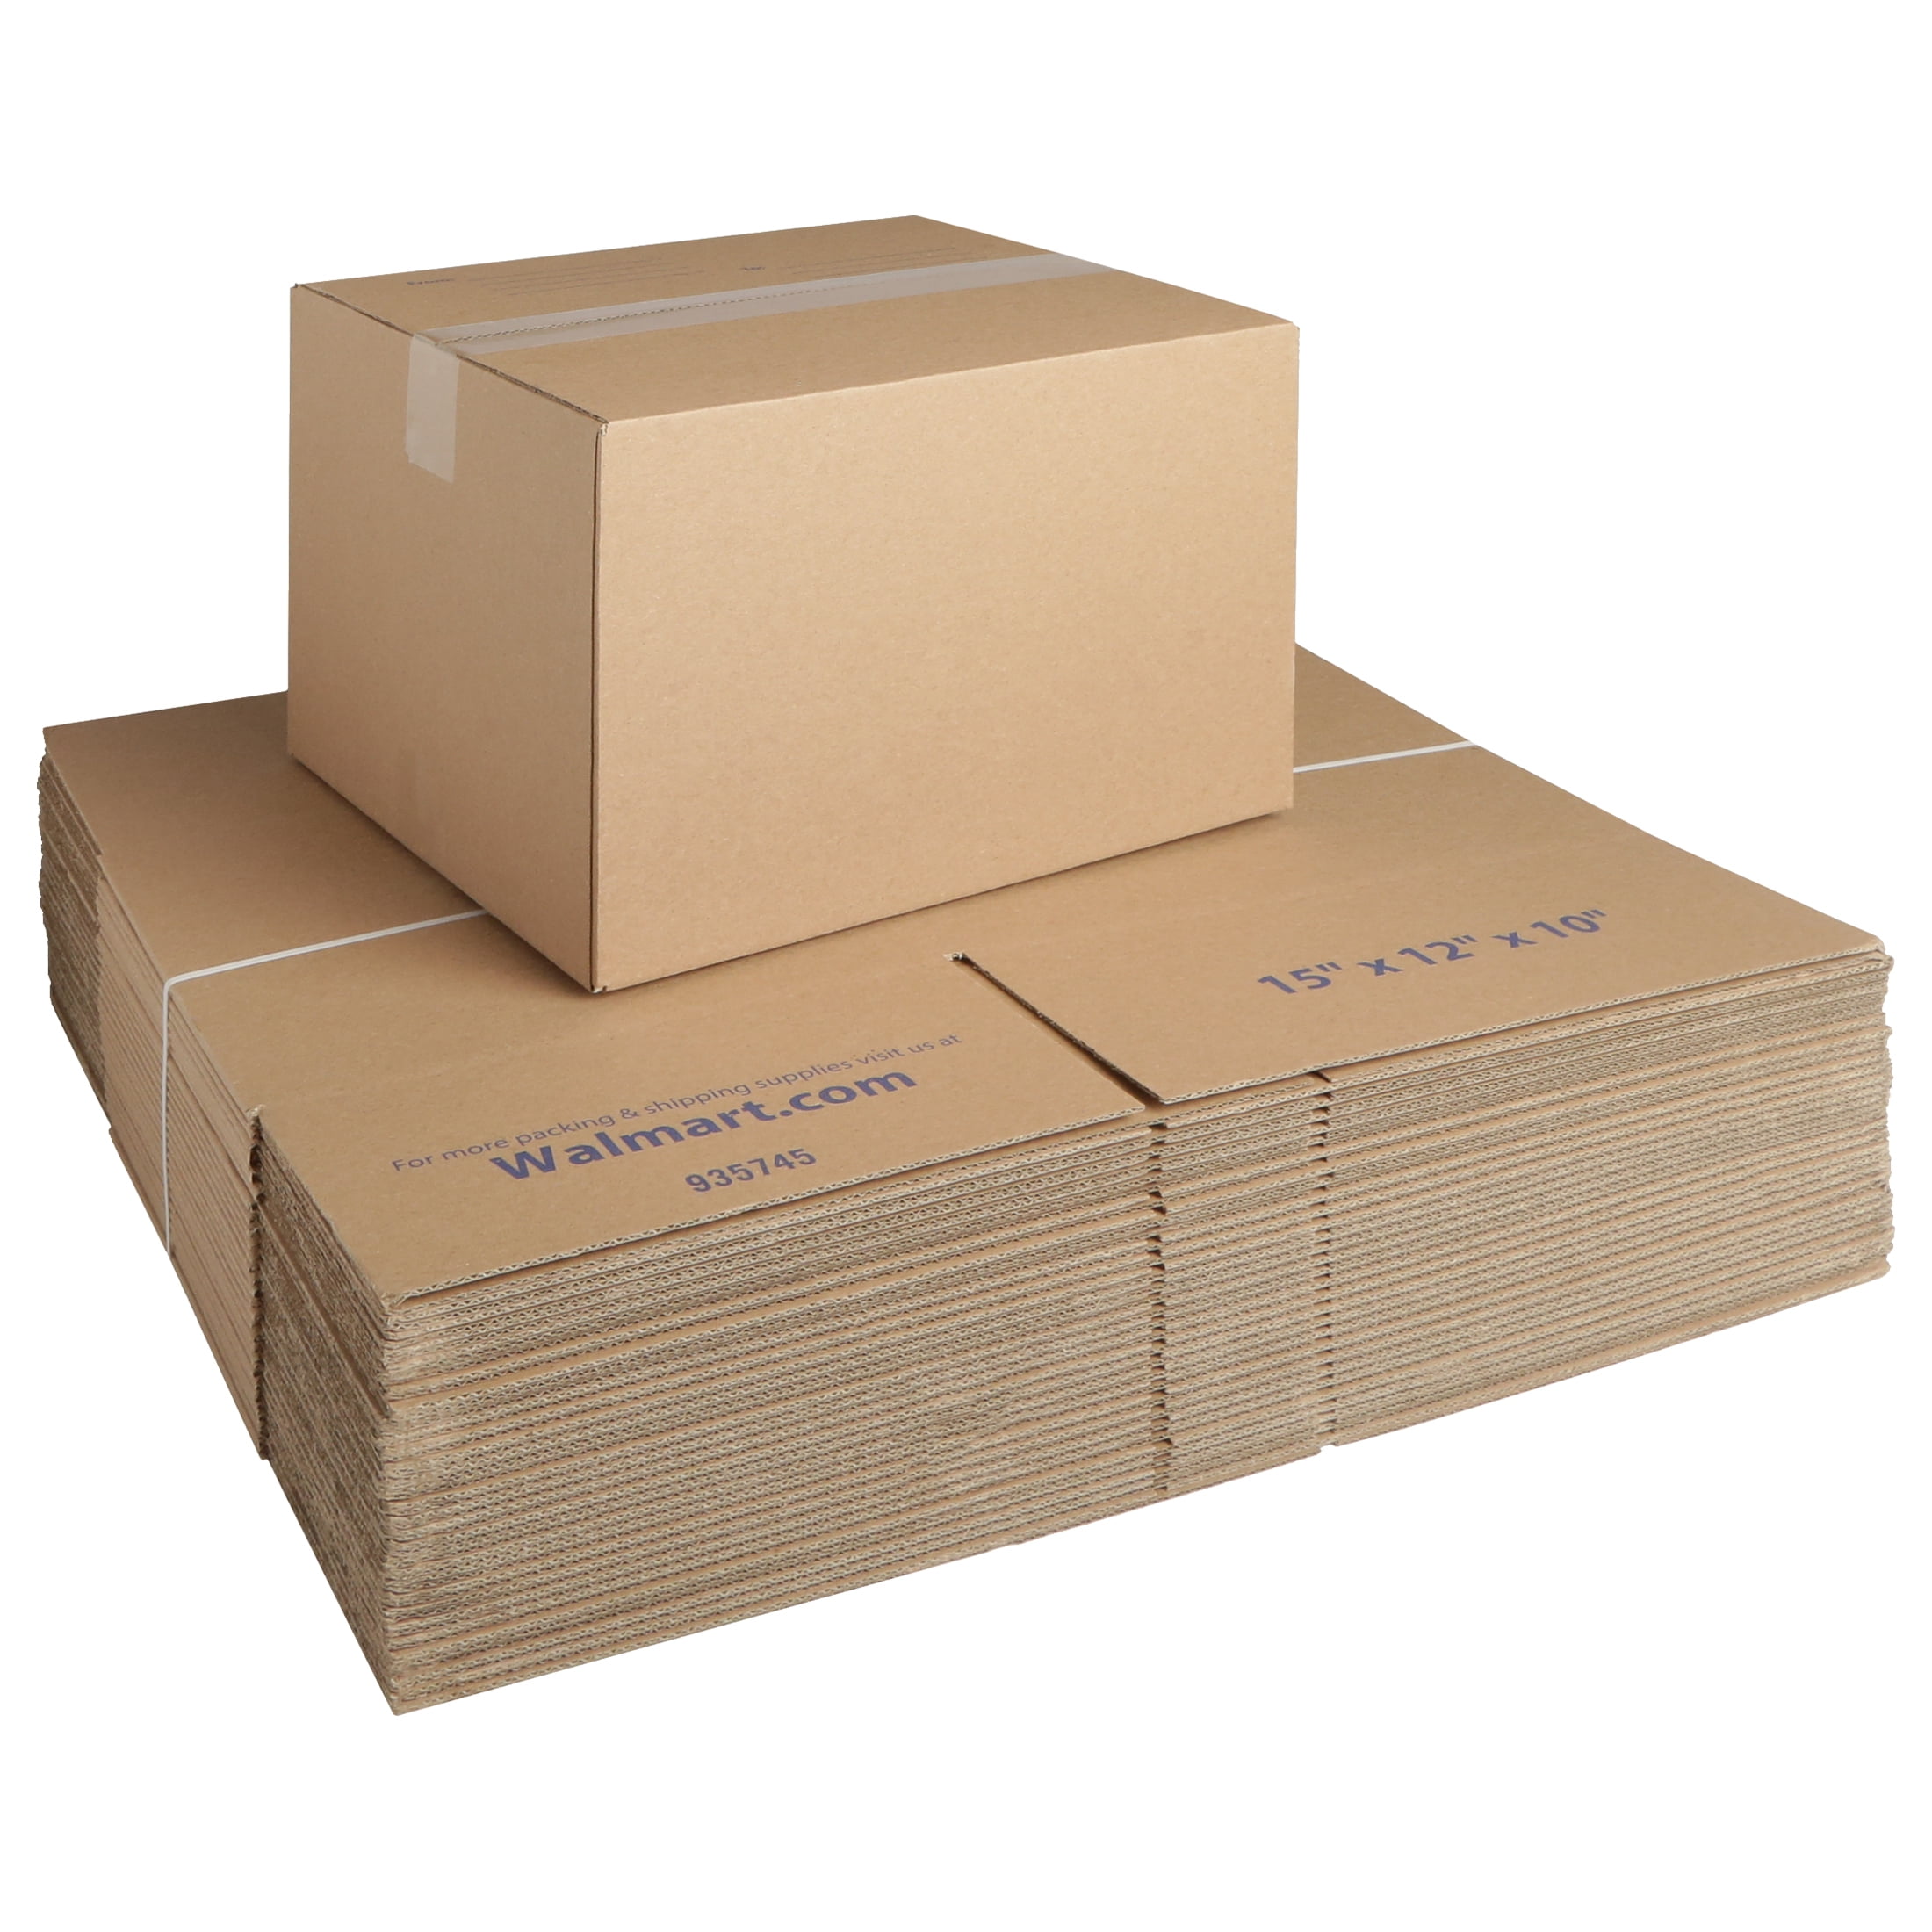 Pen+gear Large Recycled Shipping Boxes, 15L x 12W x 10H, Kraft, 25 Count, Brown